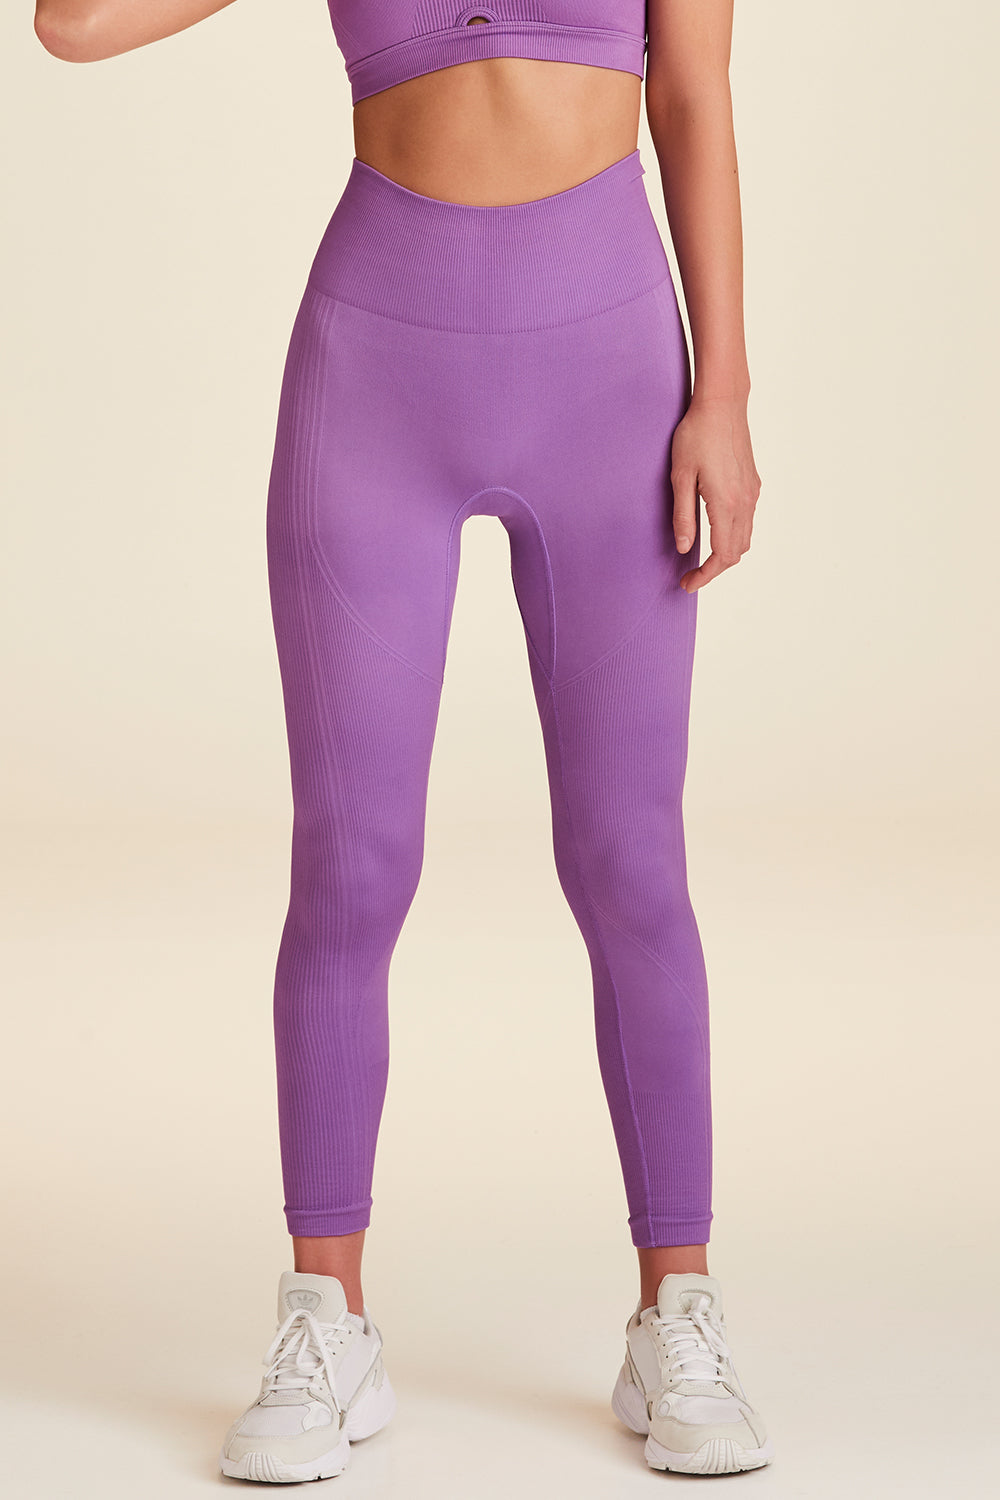 Amethyst seamless tight for women from Alala activewear